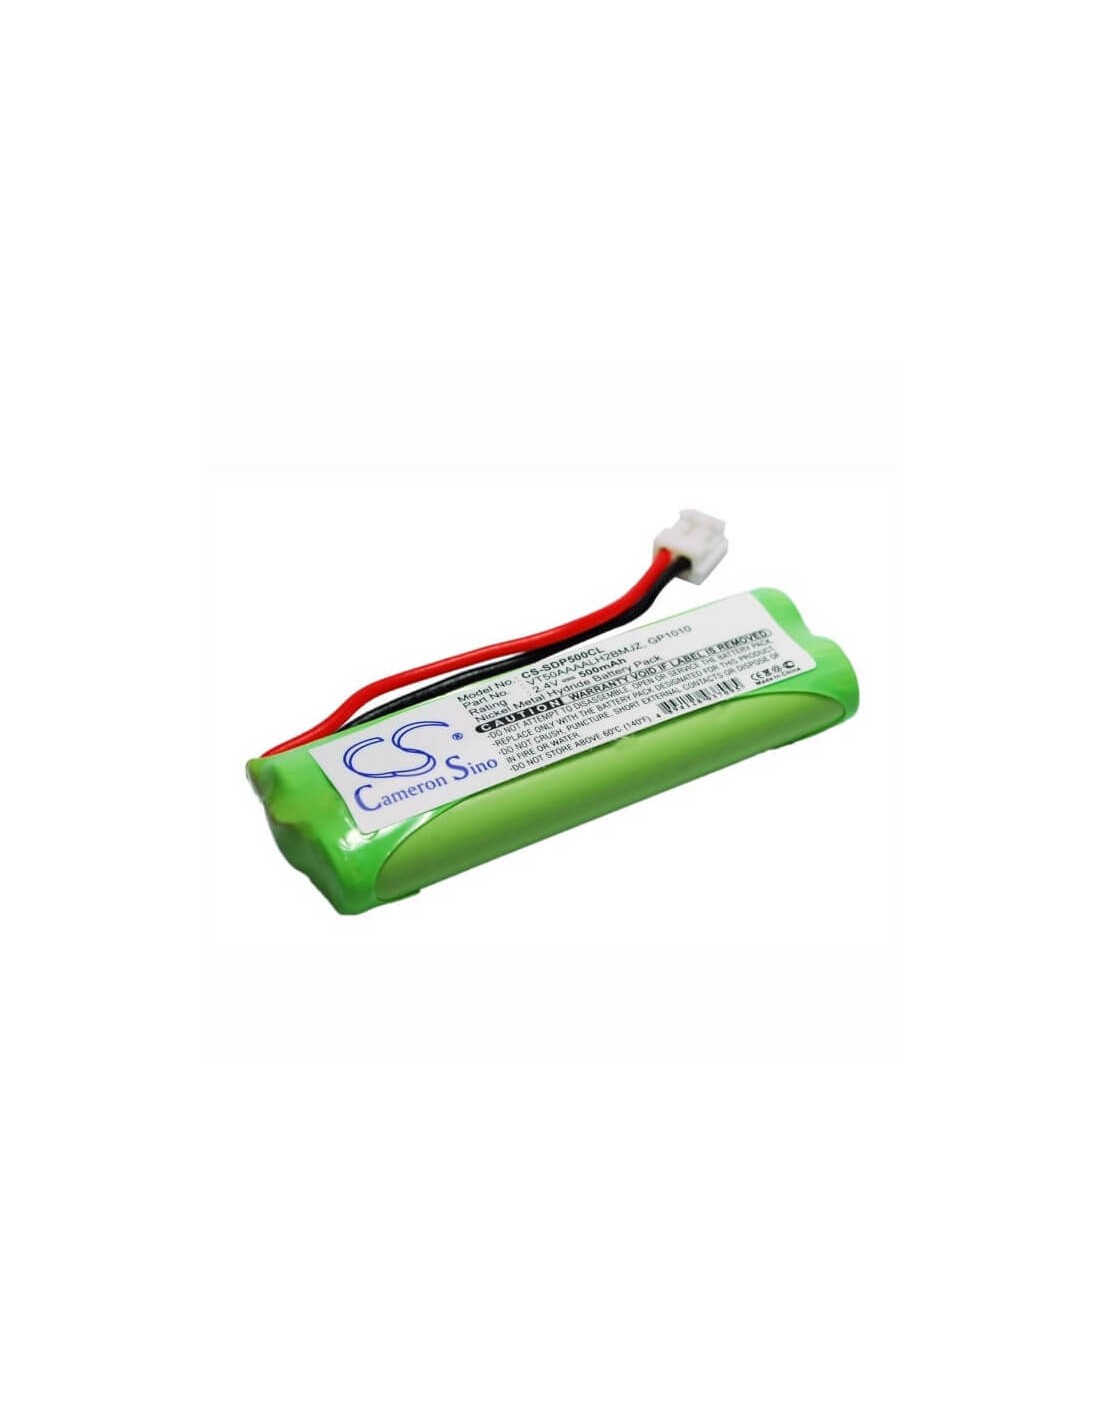 Battery for Audioline, Monza 480, Swissvoice, Dp500, 2.4V, 500mAh - 1.20Wh